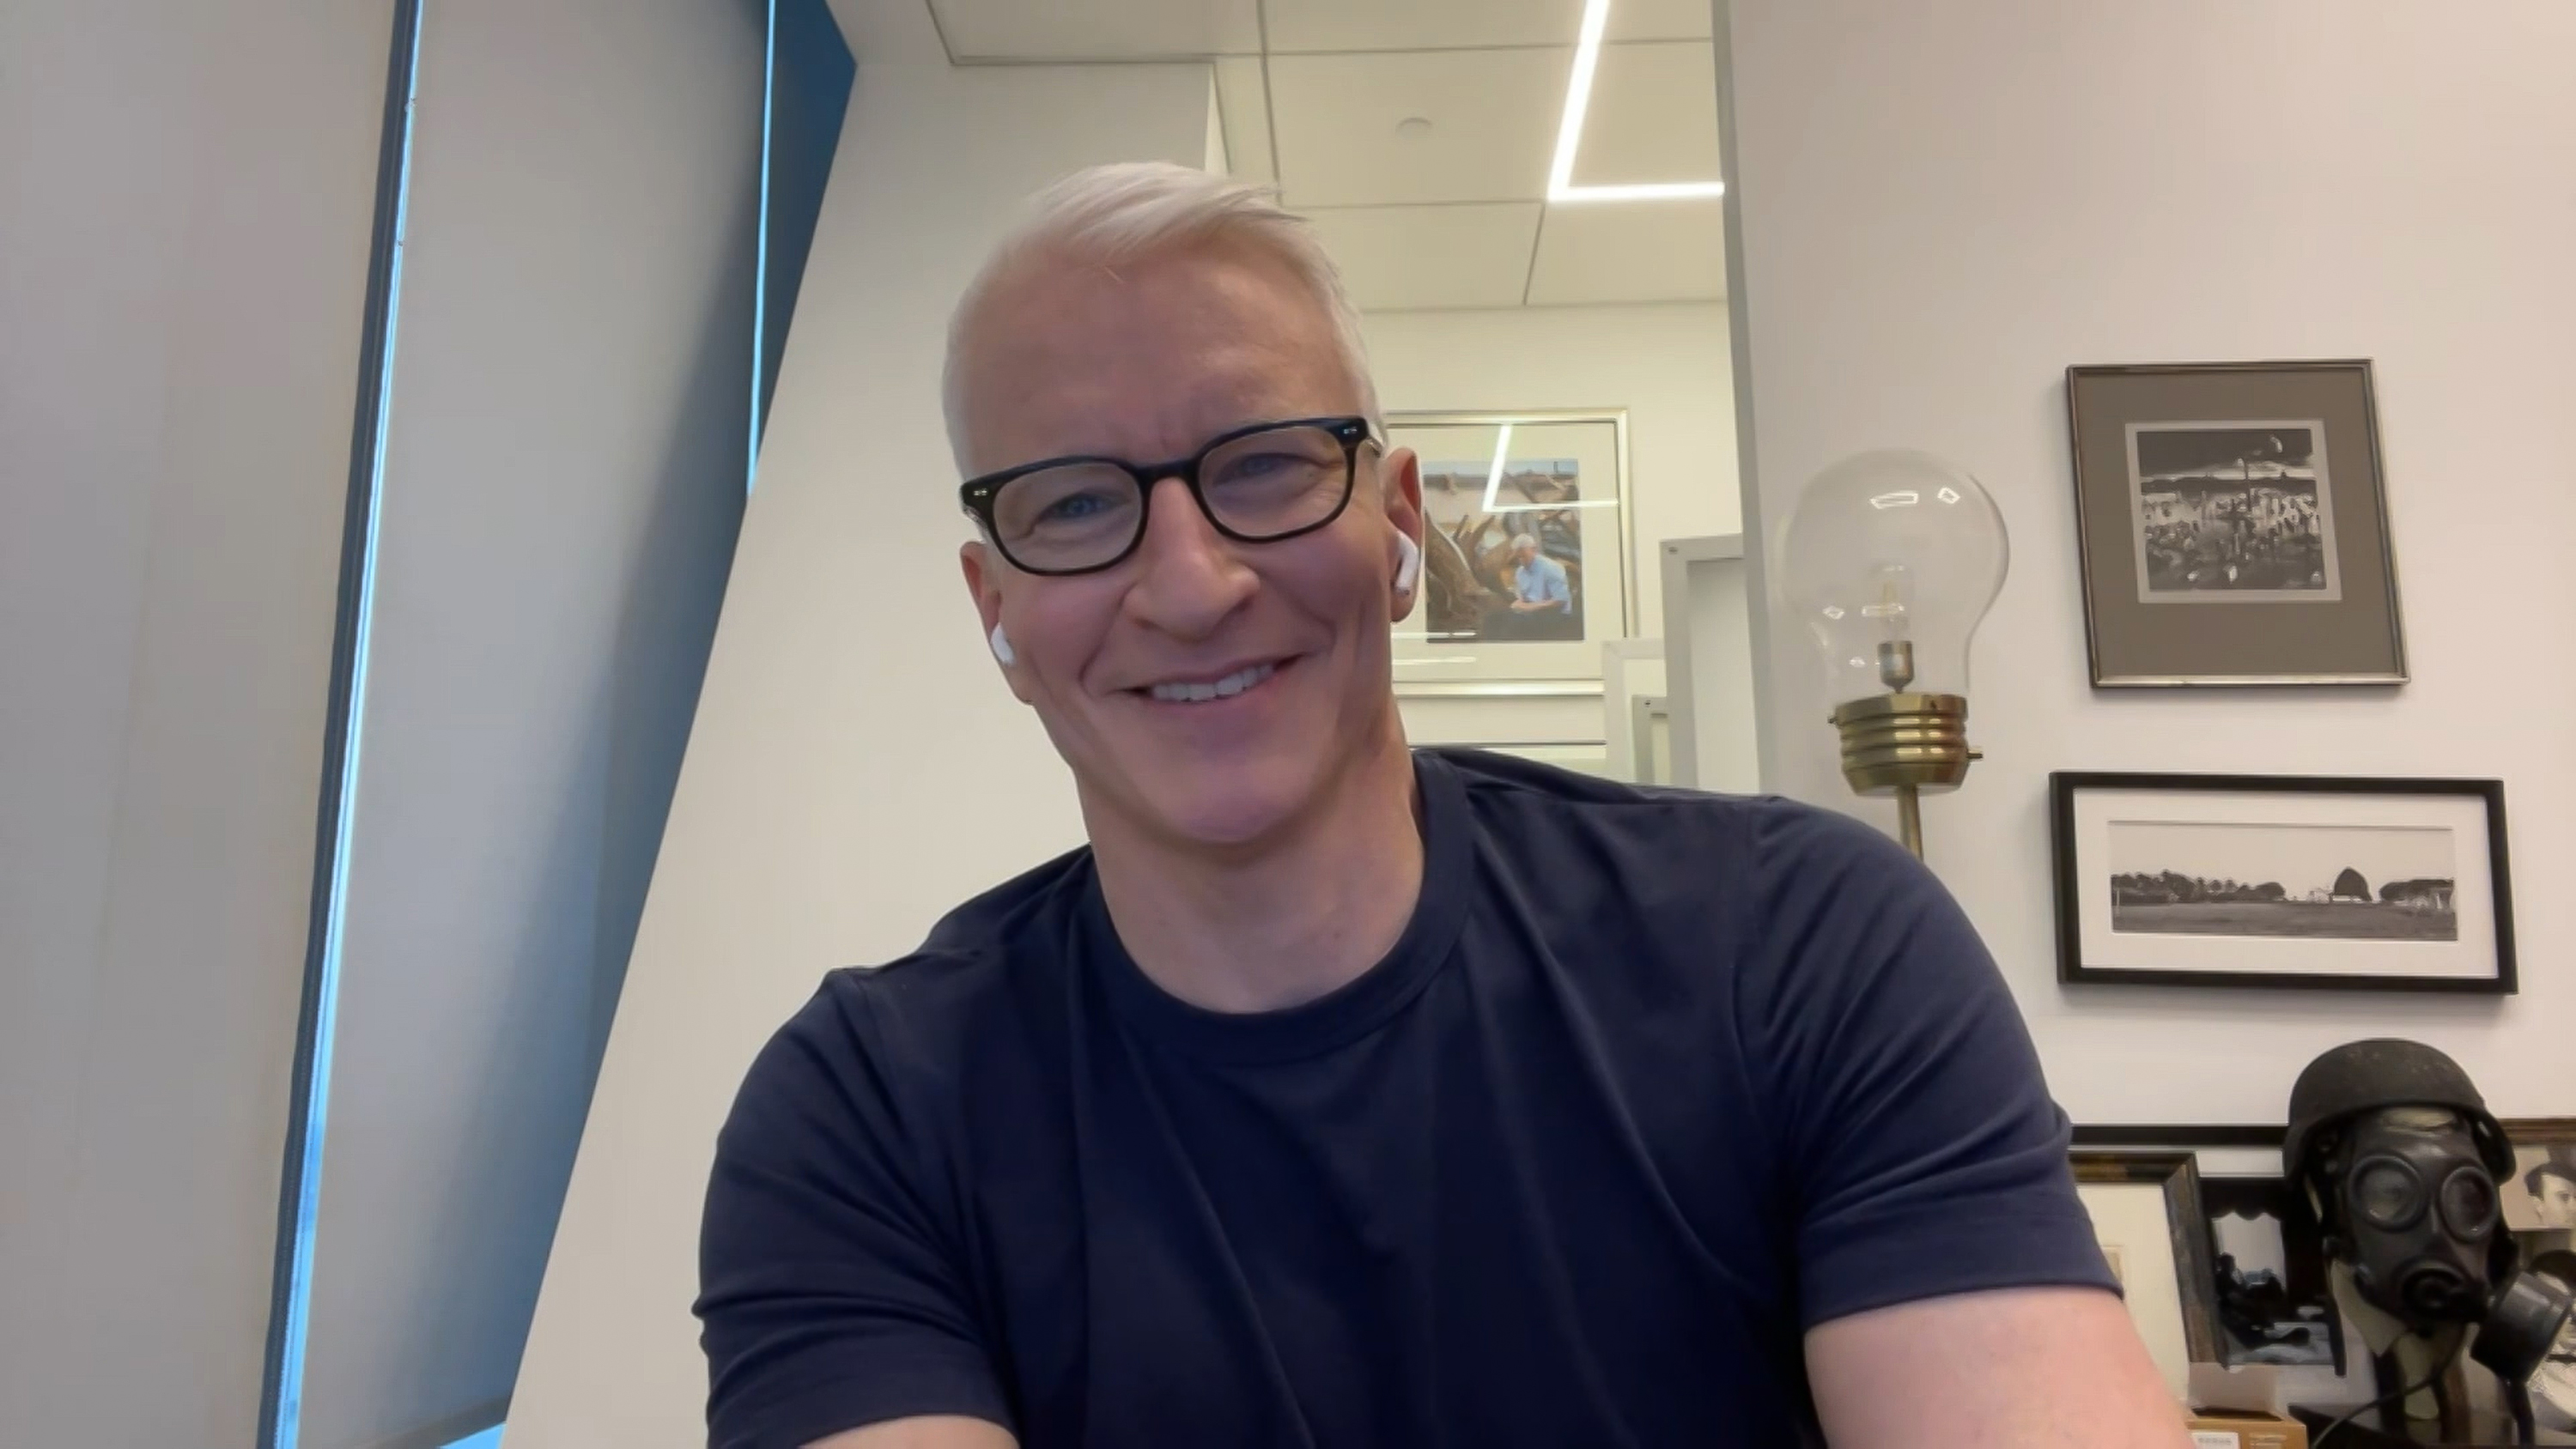 CNN star Anderson Cooper smiling in a black T-shirt